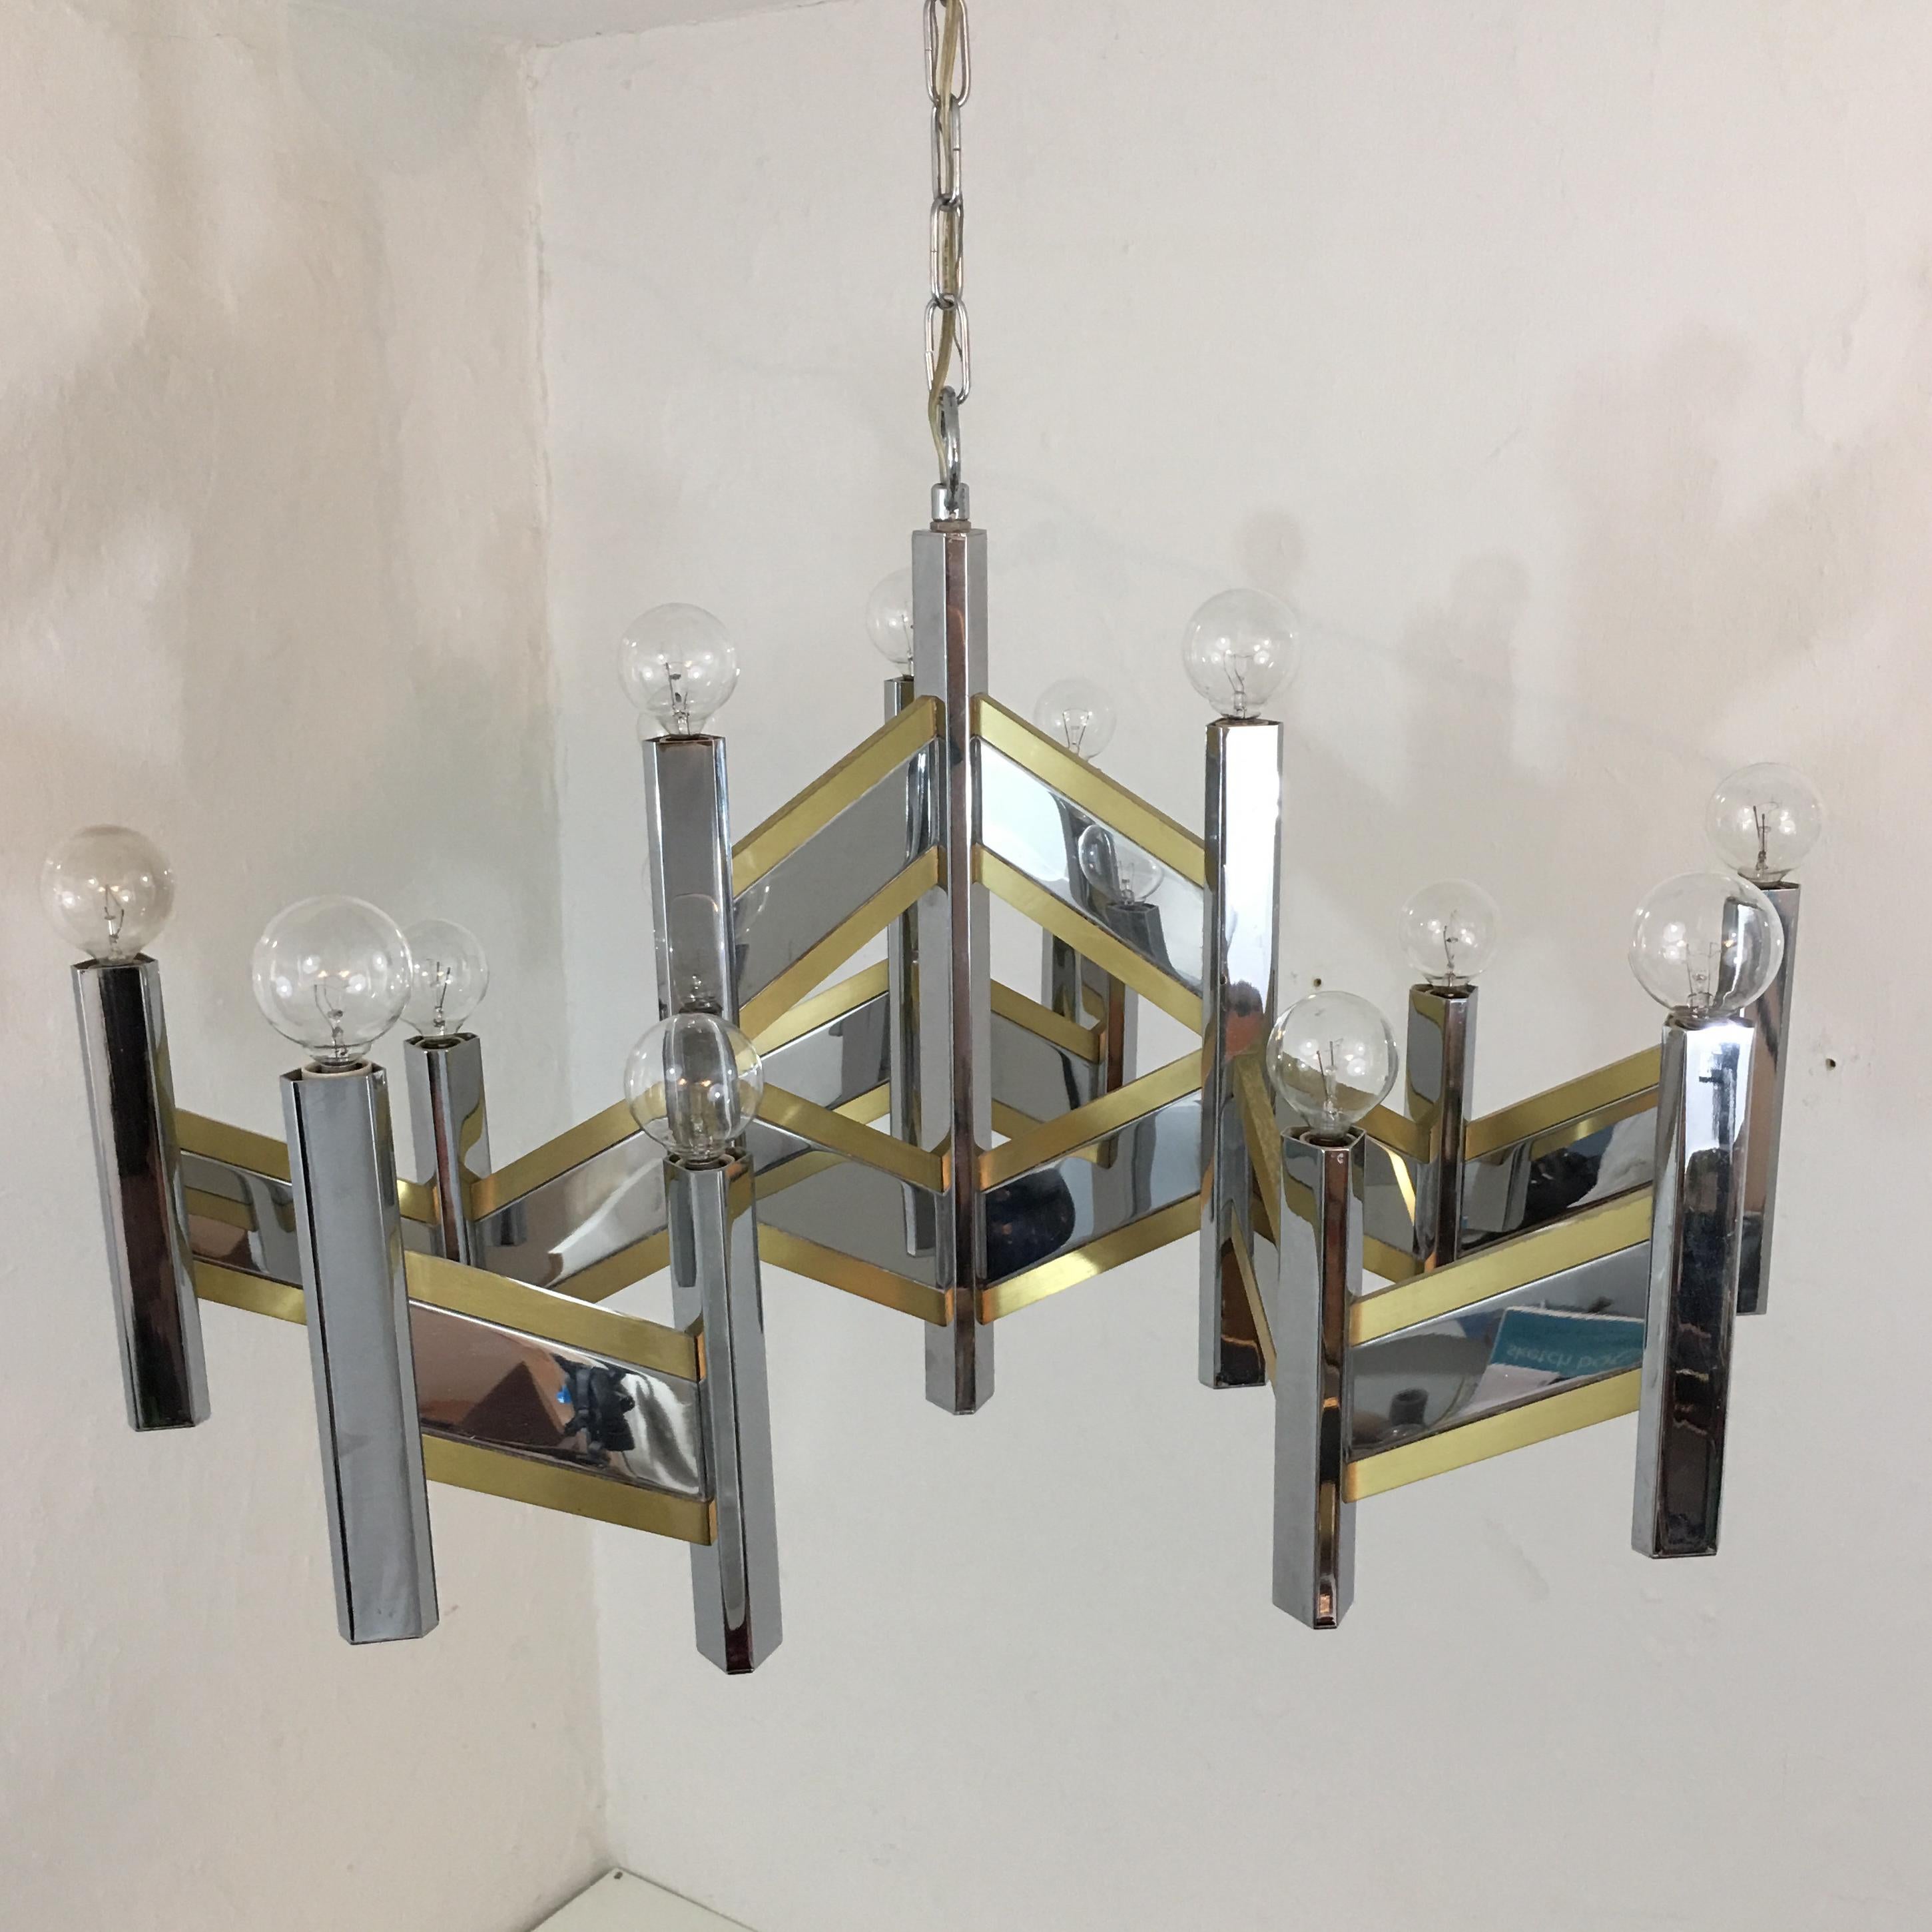  Gaetano Sciolari brass and chrome 15 bulb chandelier. The mirror like quality of the chrome and the subtle brass make this an outstanding piece. Modern yet classic with a touch of mid century. The chandelier measures 29 inches across arm to arm and